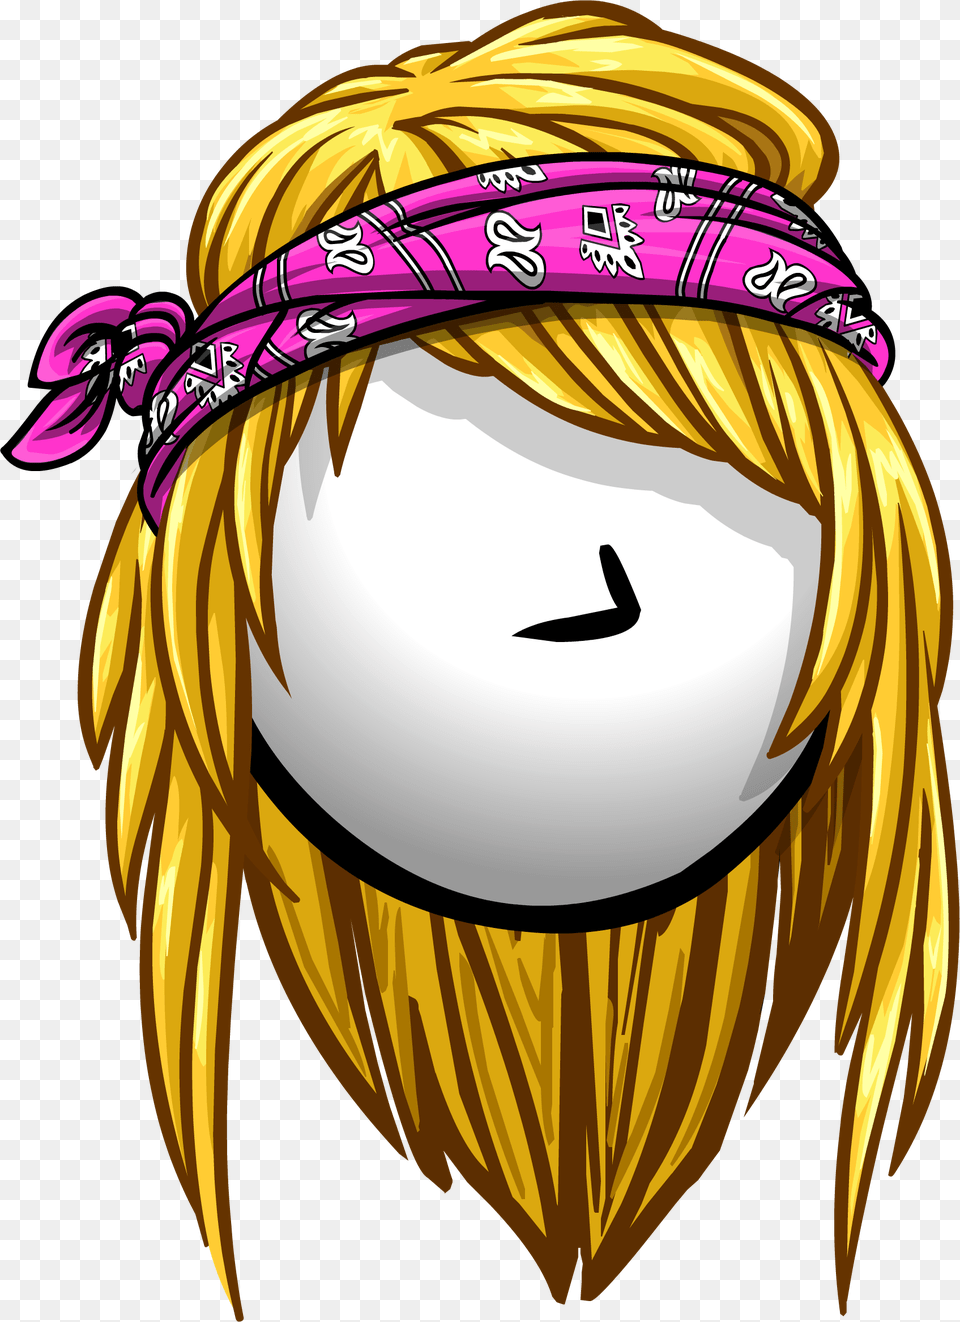 The Rock Bandana Clothing Icon Id 1265 Blonde Hair Club Penguin, Publication, Book, Comics, Accessories Free Png